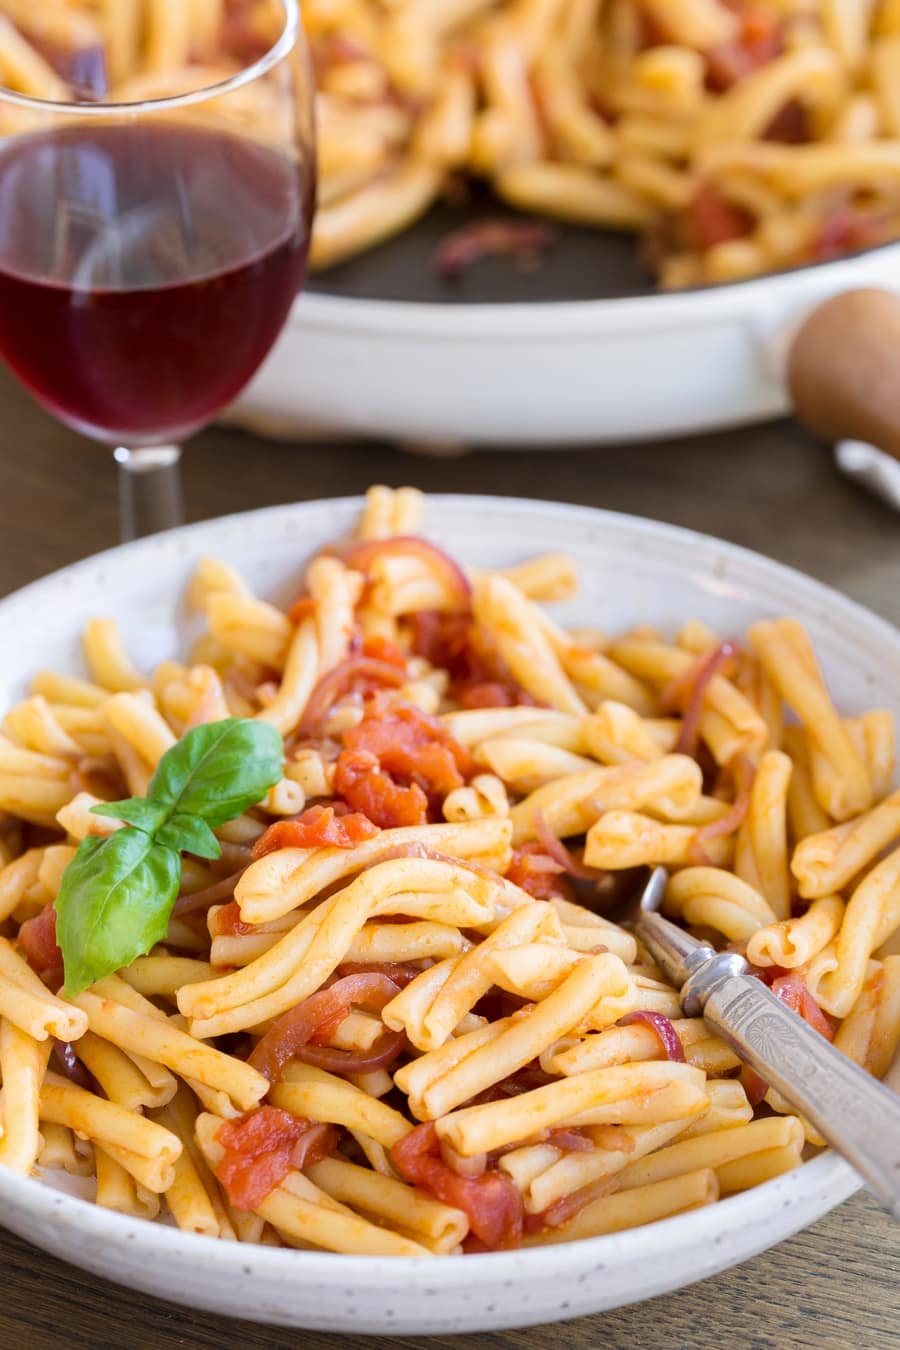 Balsamico onion pasta with fresh tomato sauce in a bowl.